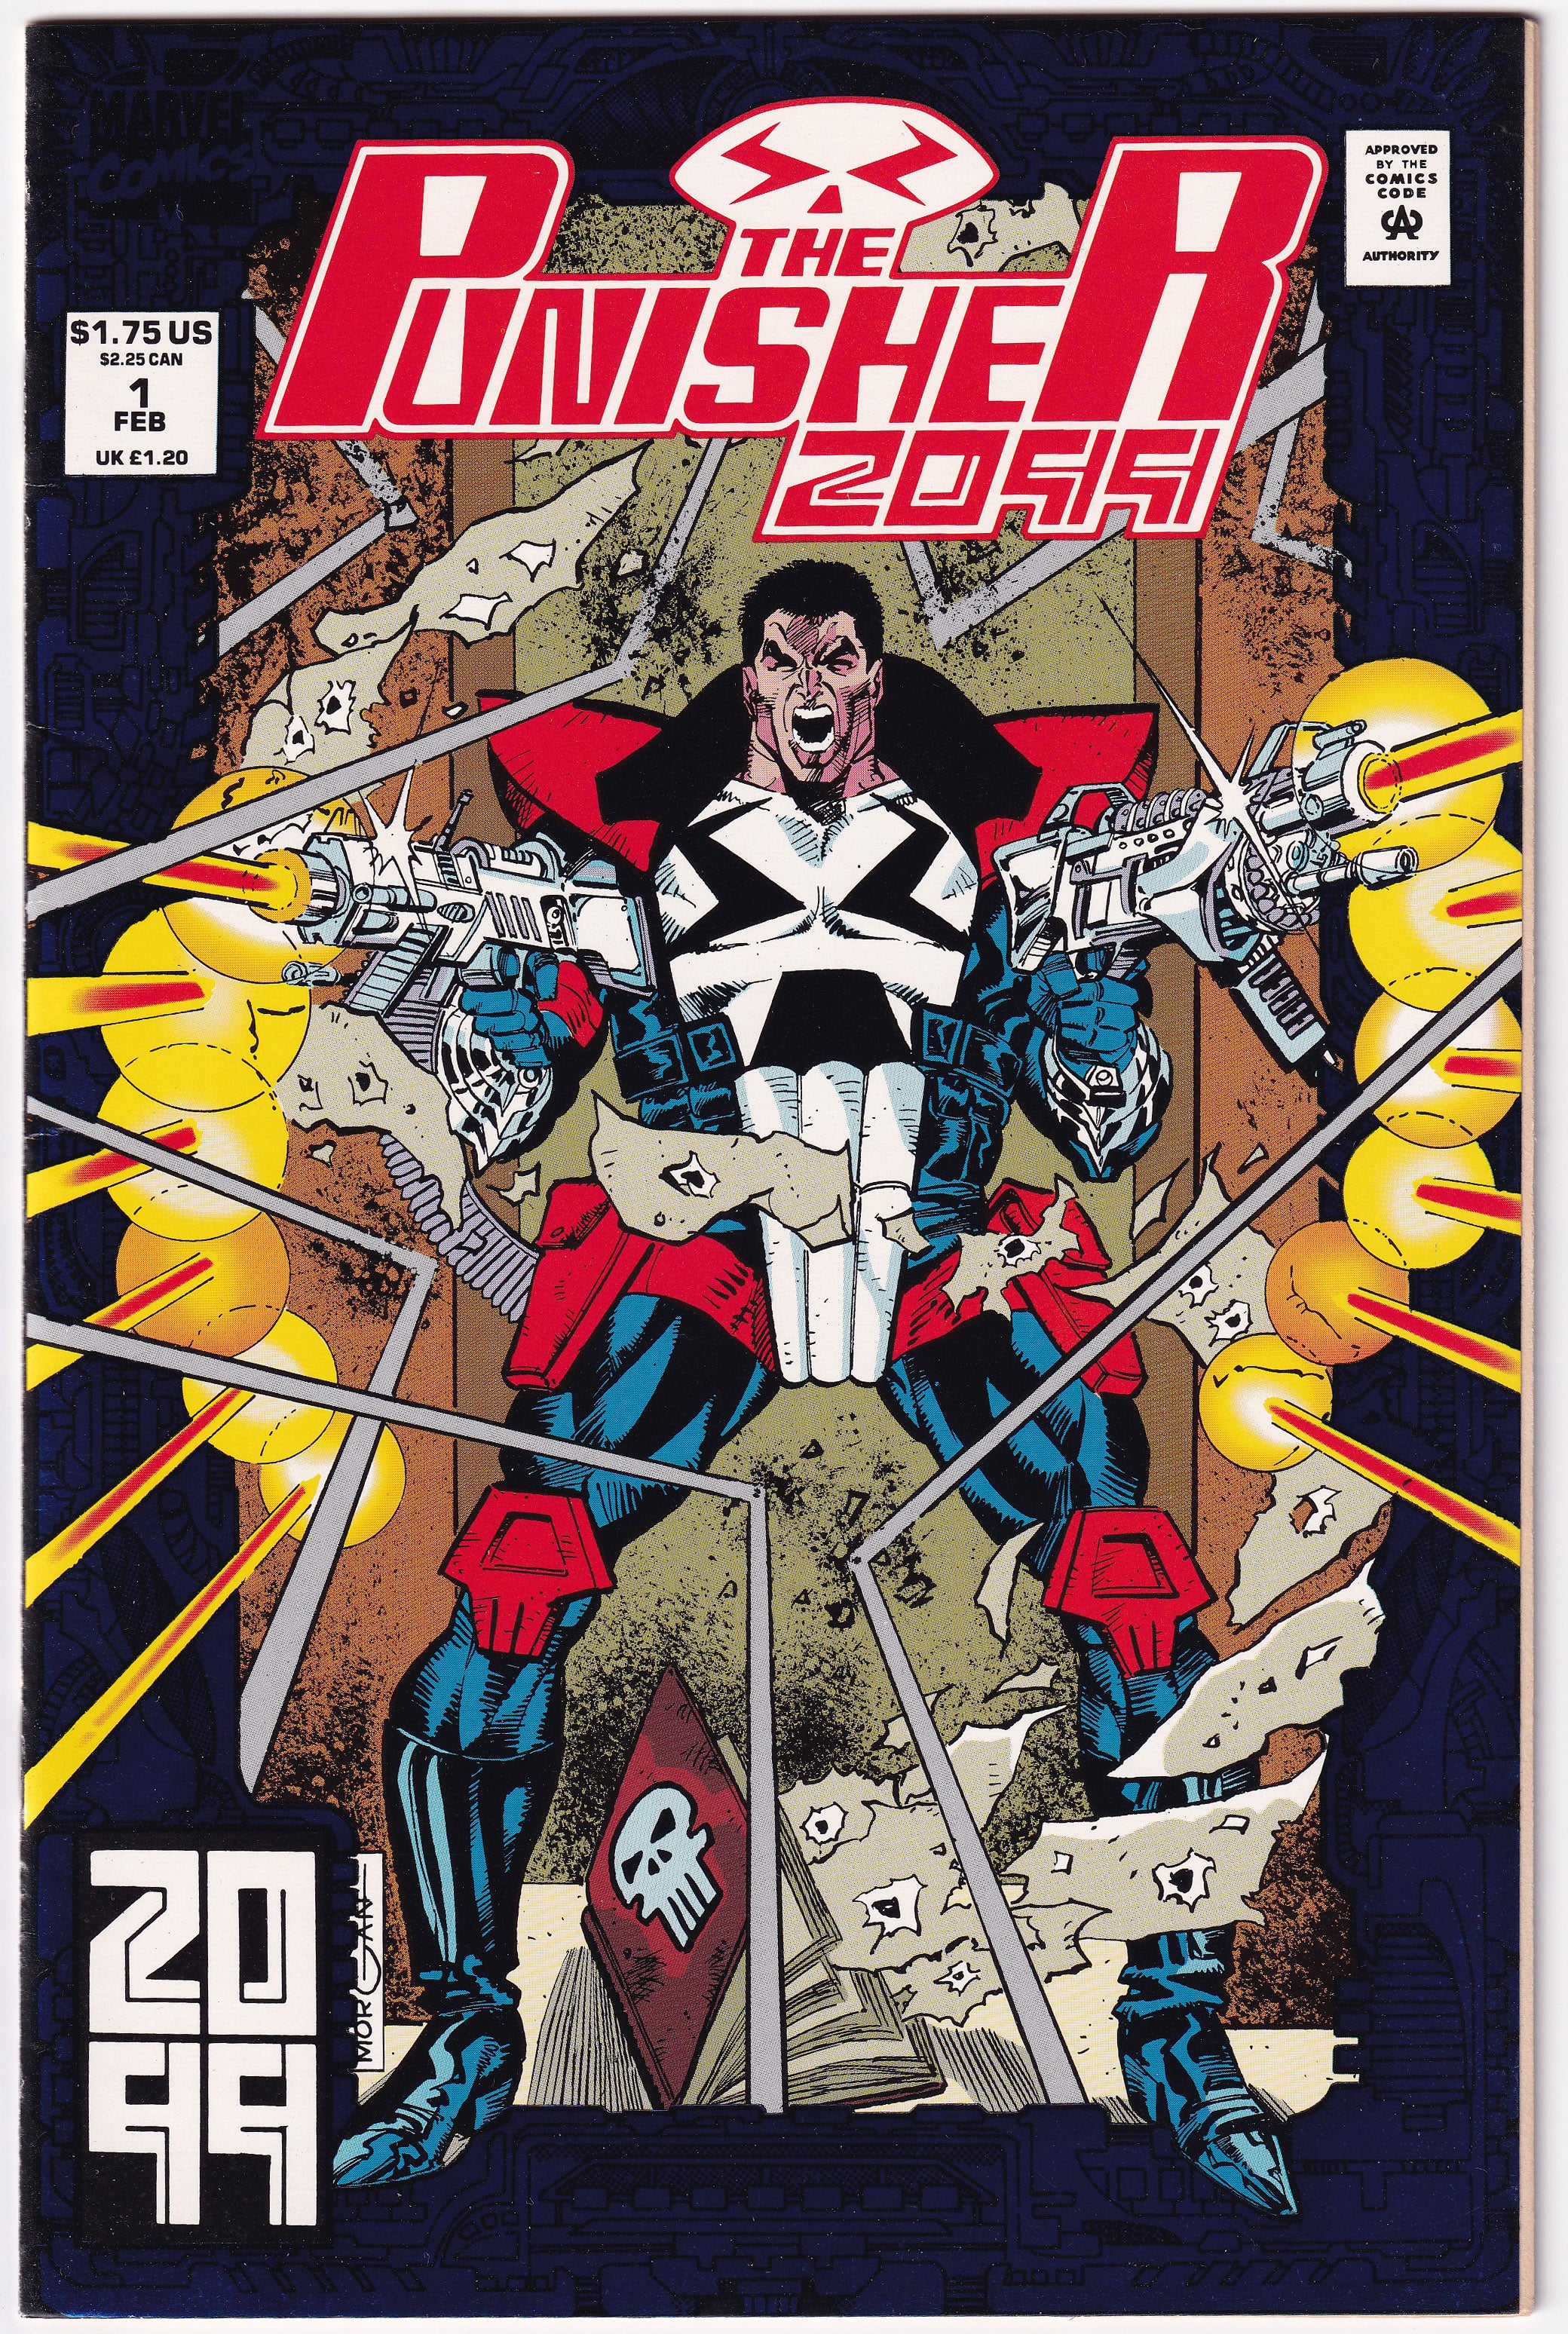 Photo of Punisher 2099, Vol. 1 (1993)  Iss 1A Very Fine  Comic sold by Stronghold Collectibles